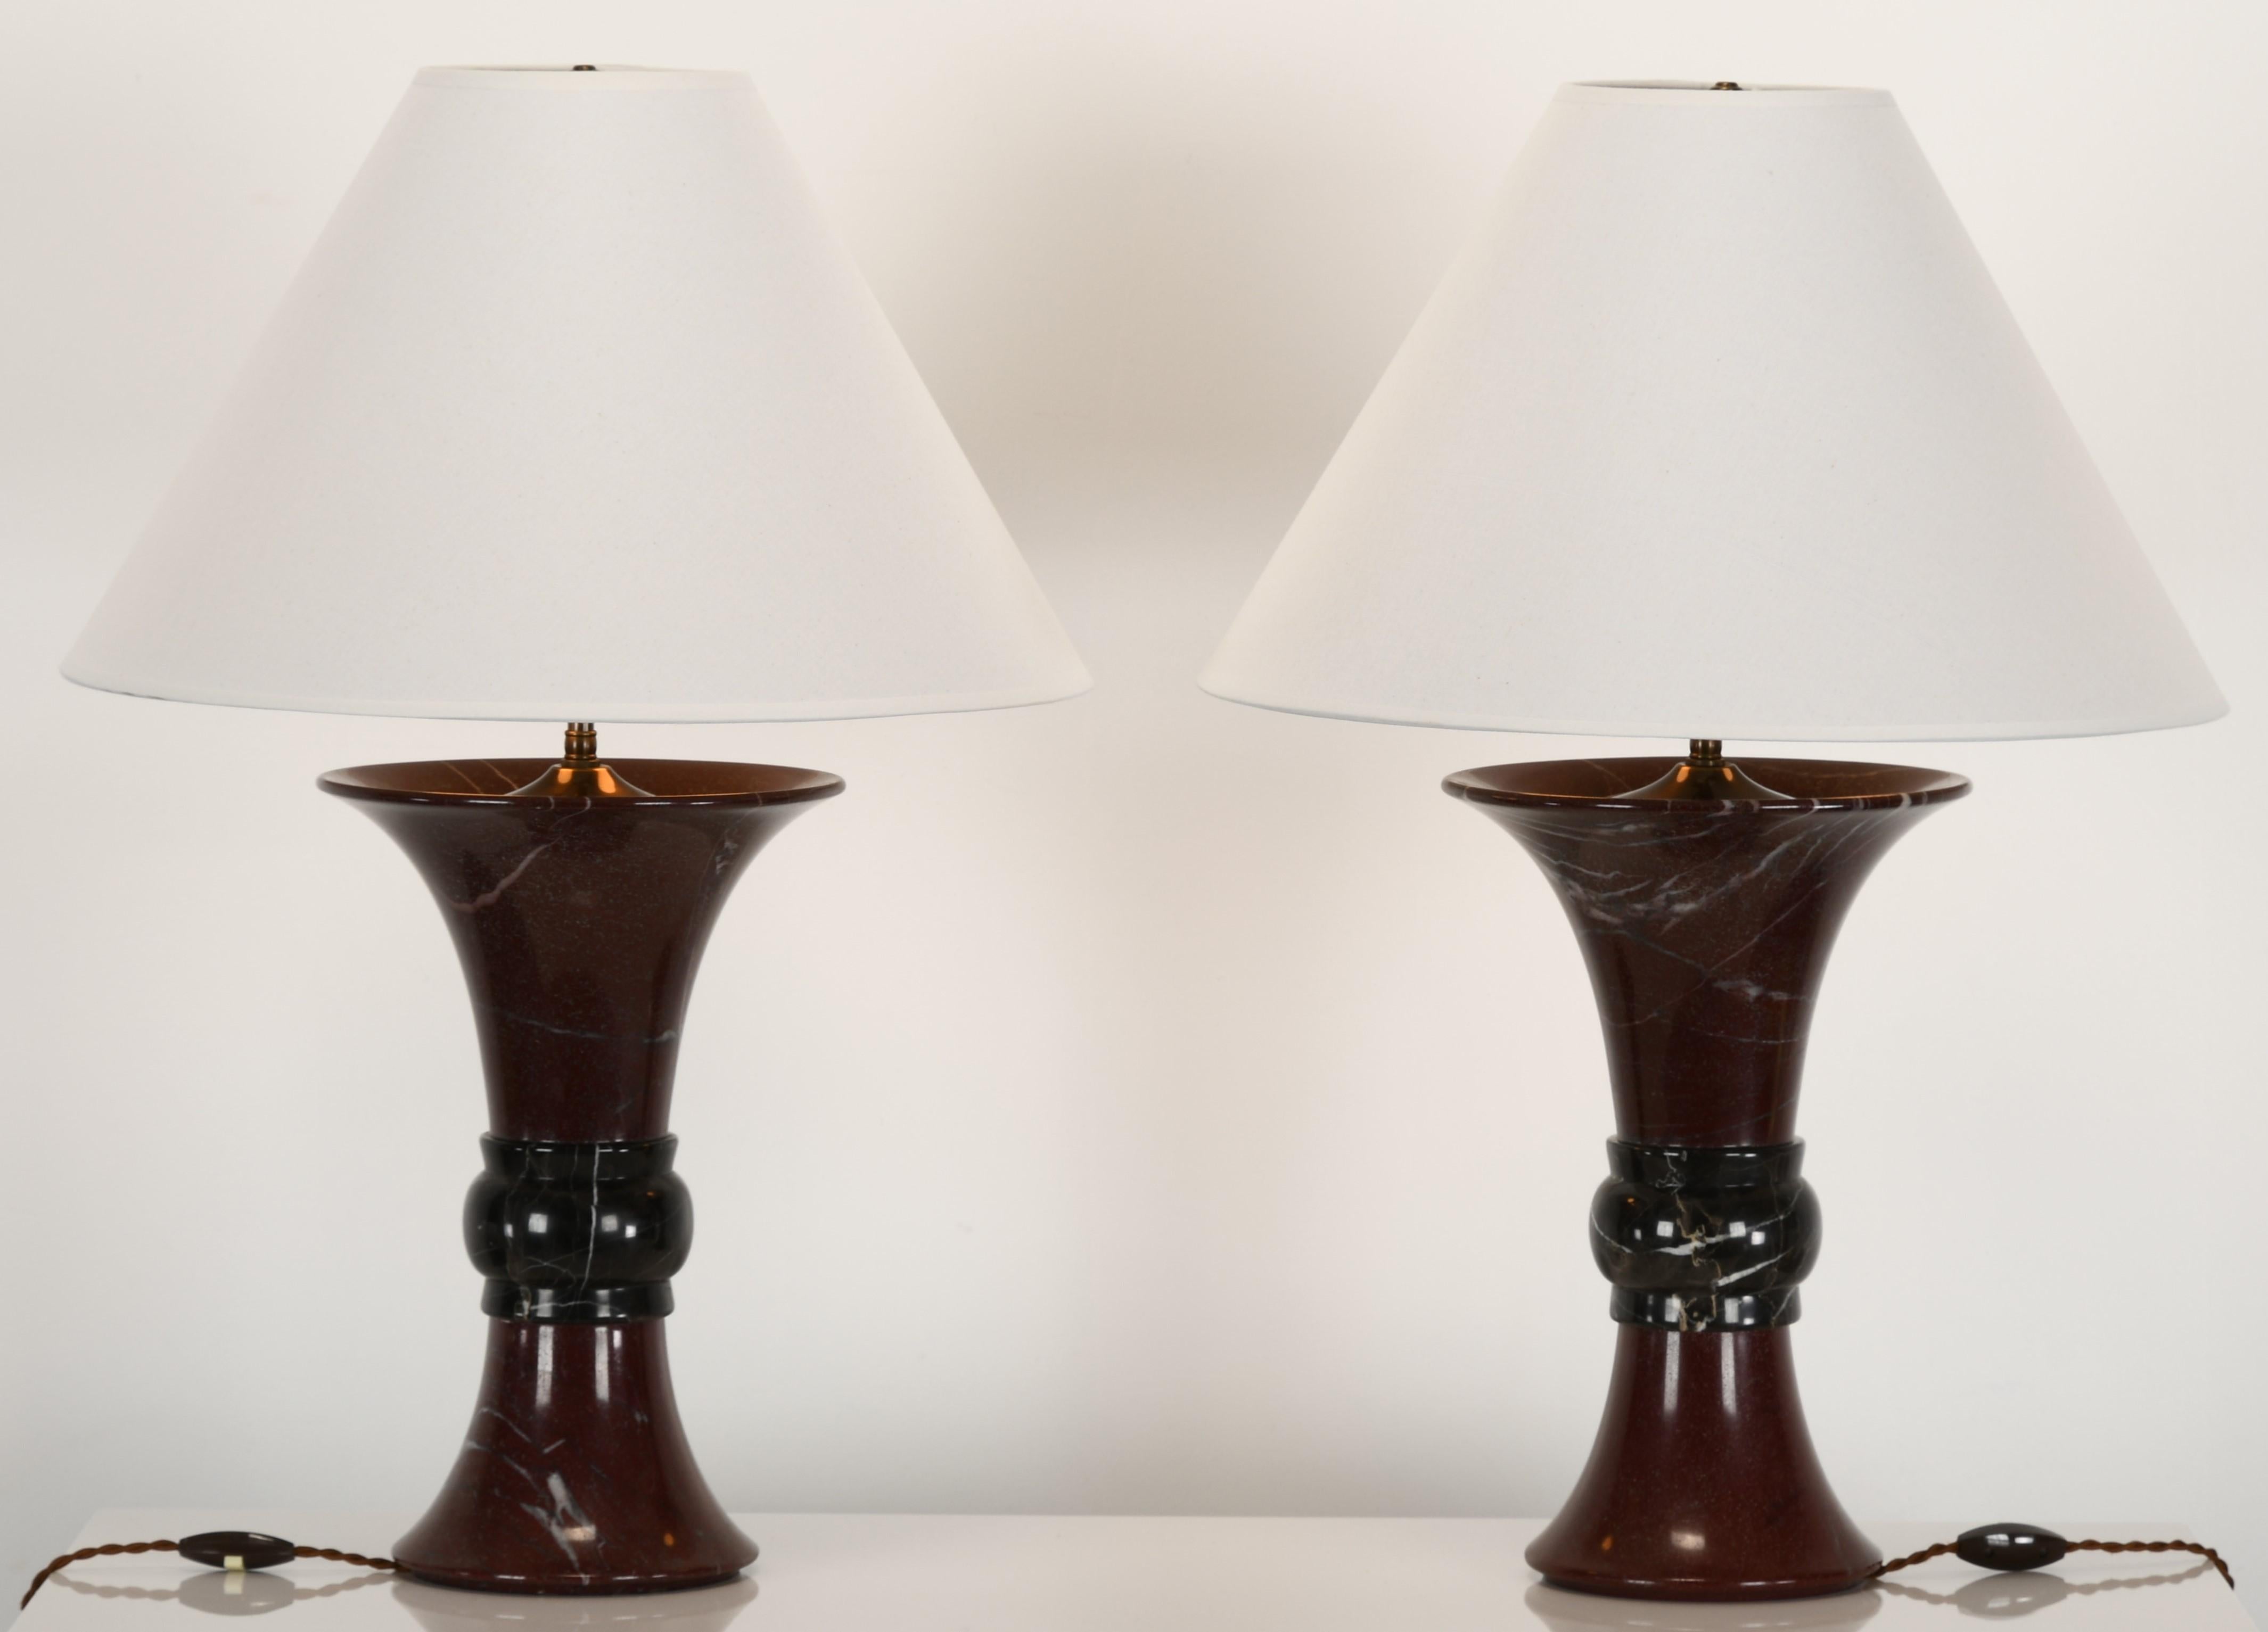 A pair of Donghia marble two-tone Griotte red marble with white veining mixed with Belgian black and white marble center table lamps. Shades not included. Lamps are in very good condition labeled 